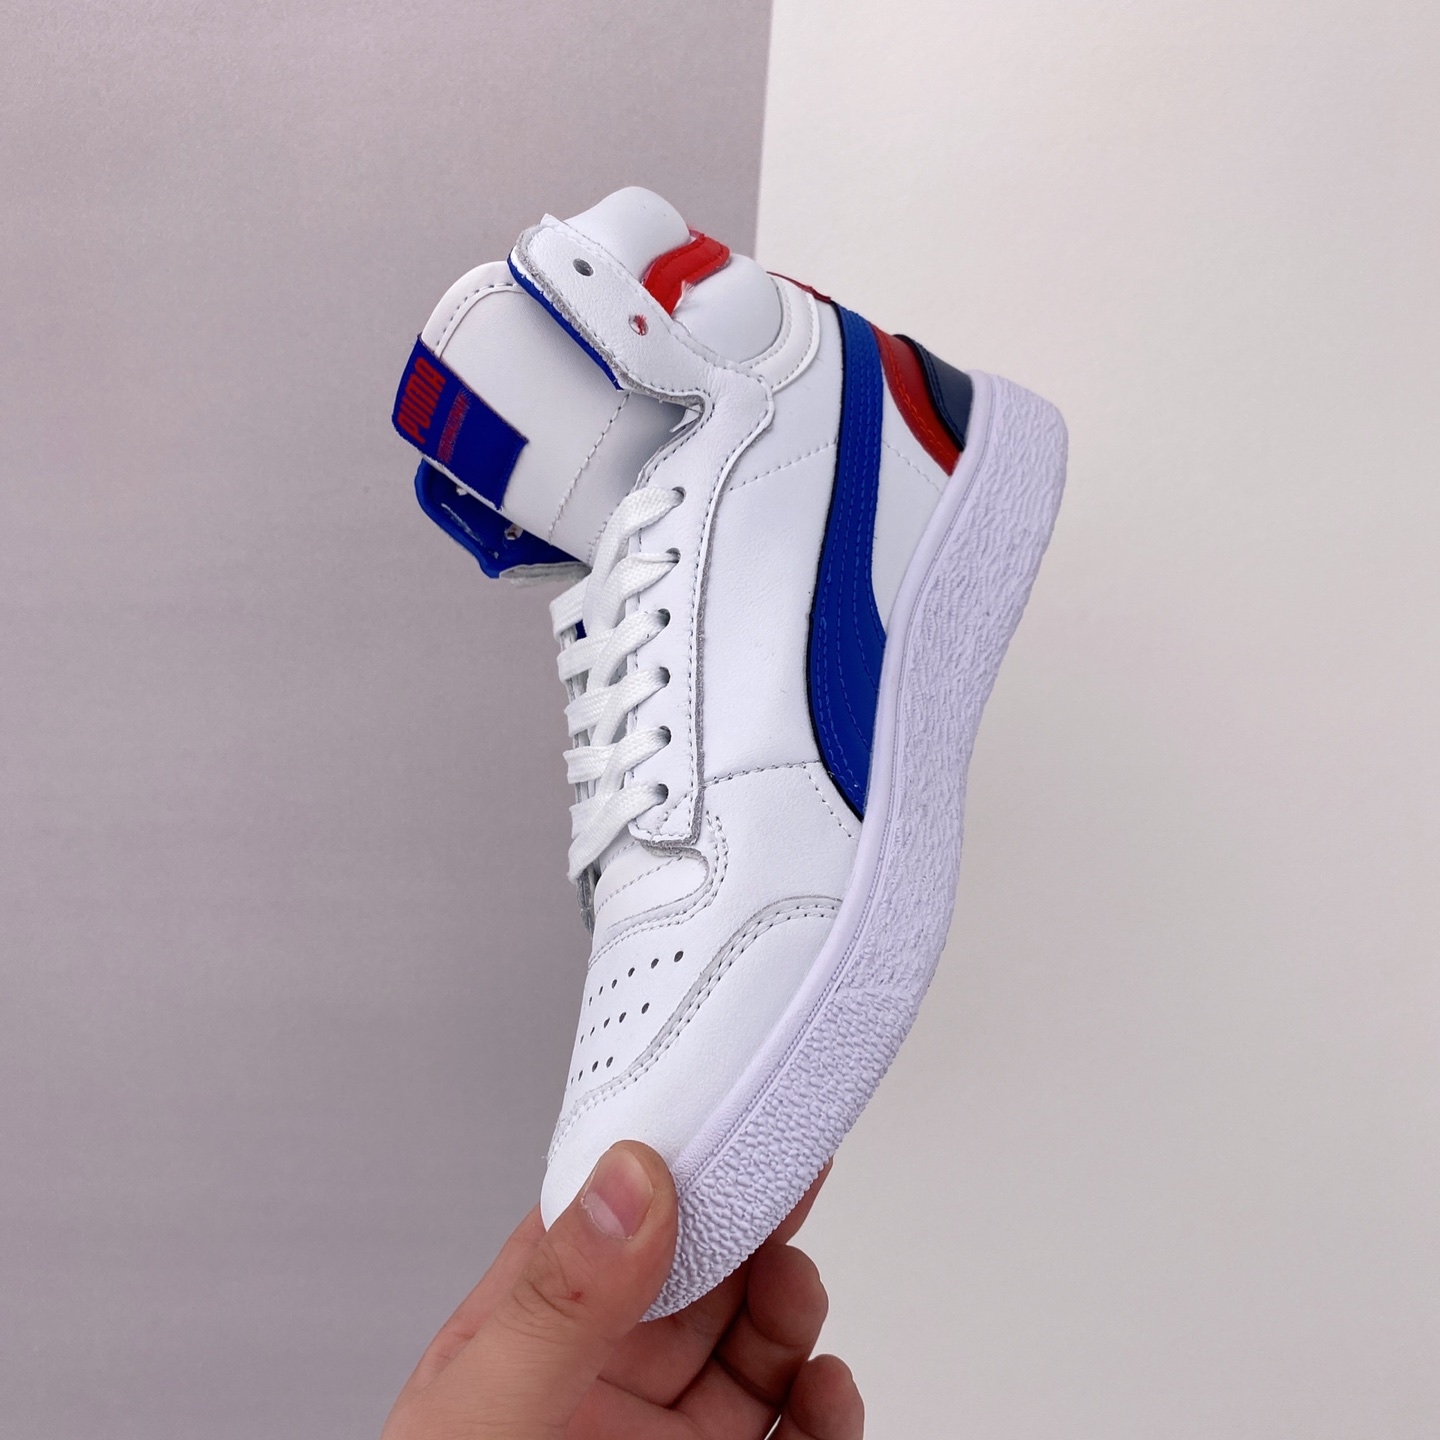 PUMA Ralph Sampson Mid OG White Blue Red 370847-02 - Classic Style with Retro Flair